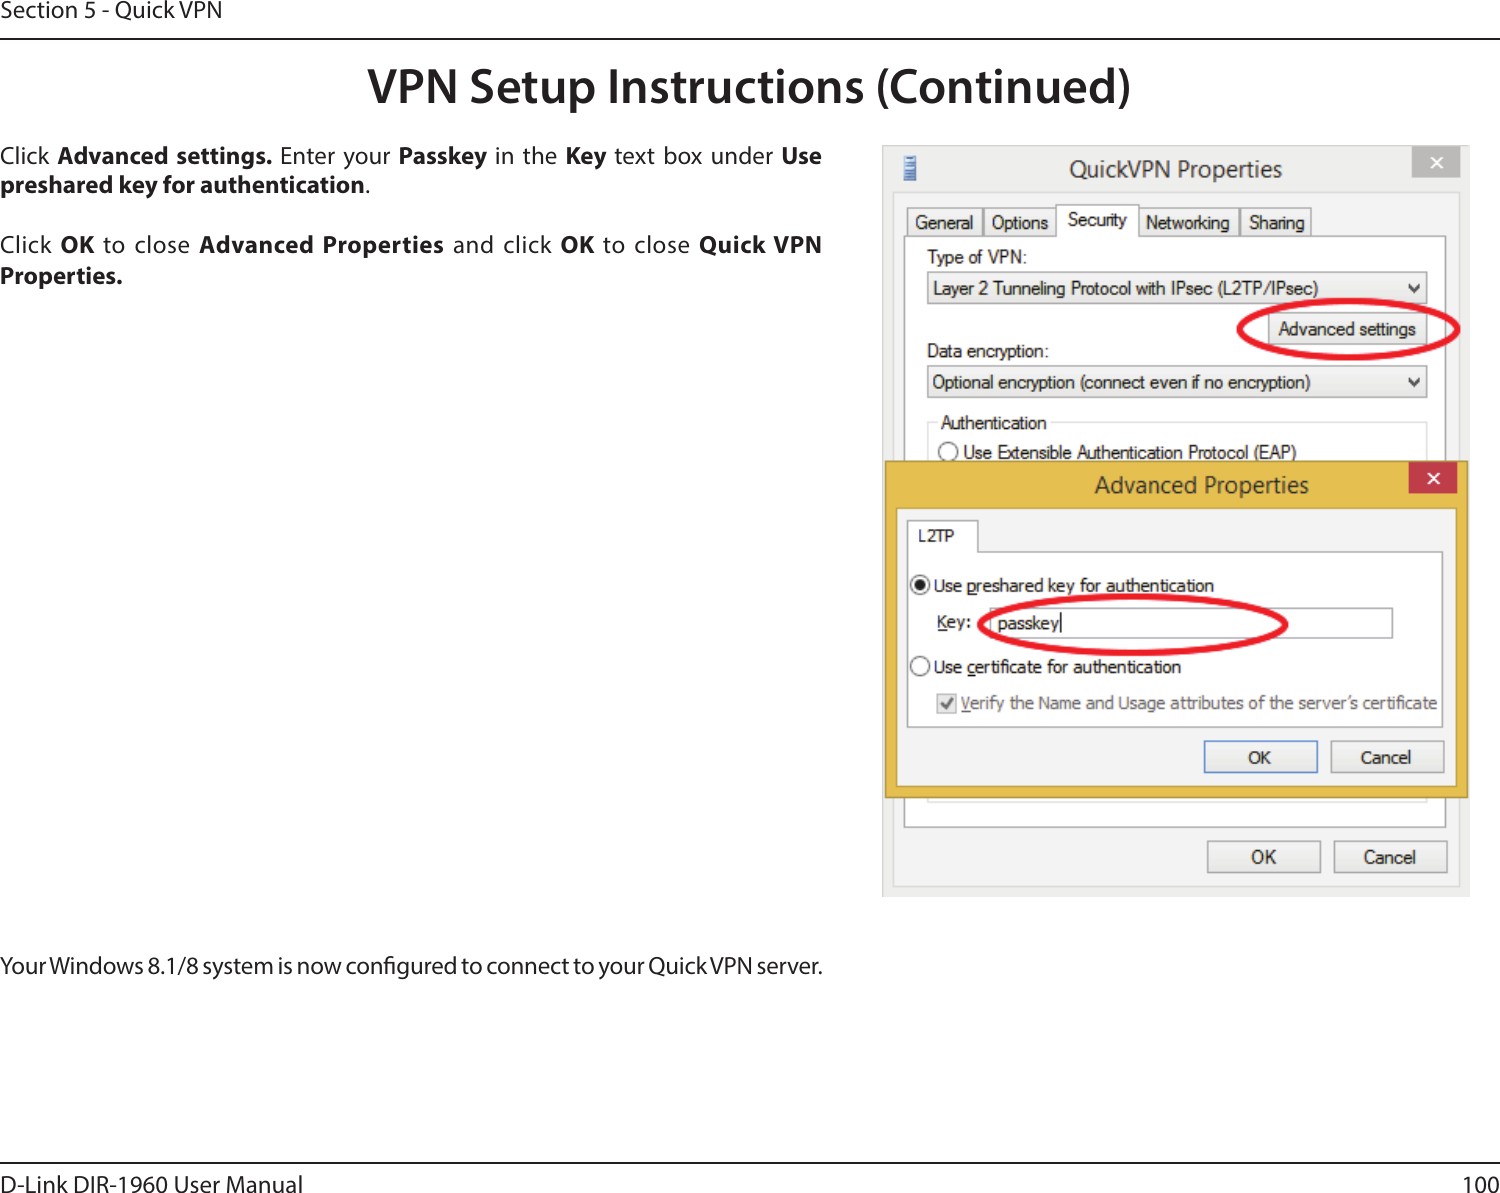 100D-Link DIR-1960 User ManualSection 5 - Quick VPNClick Advanced settings. Enter your Passkey in the Key text box under Use preshared key for authentication. Click OK to close Advanced Properties and click OK to close Quick VPN Properties.Your Windows 8.1/8 system is now congured to connect to your Quick VPN server.VPN Setup Instructions (Continued)